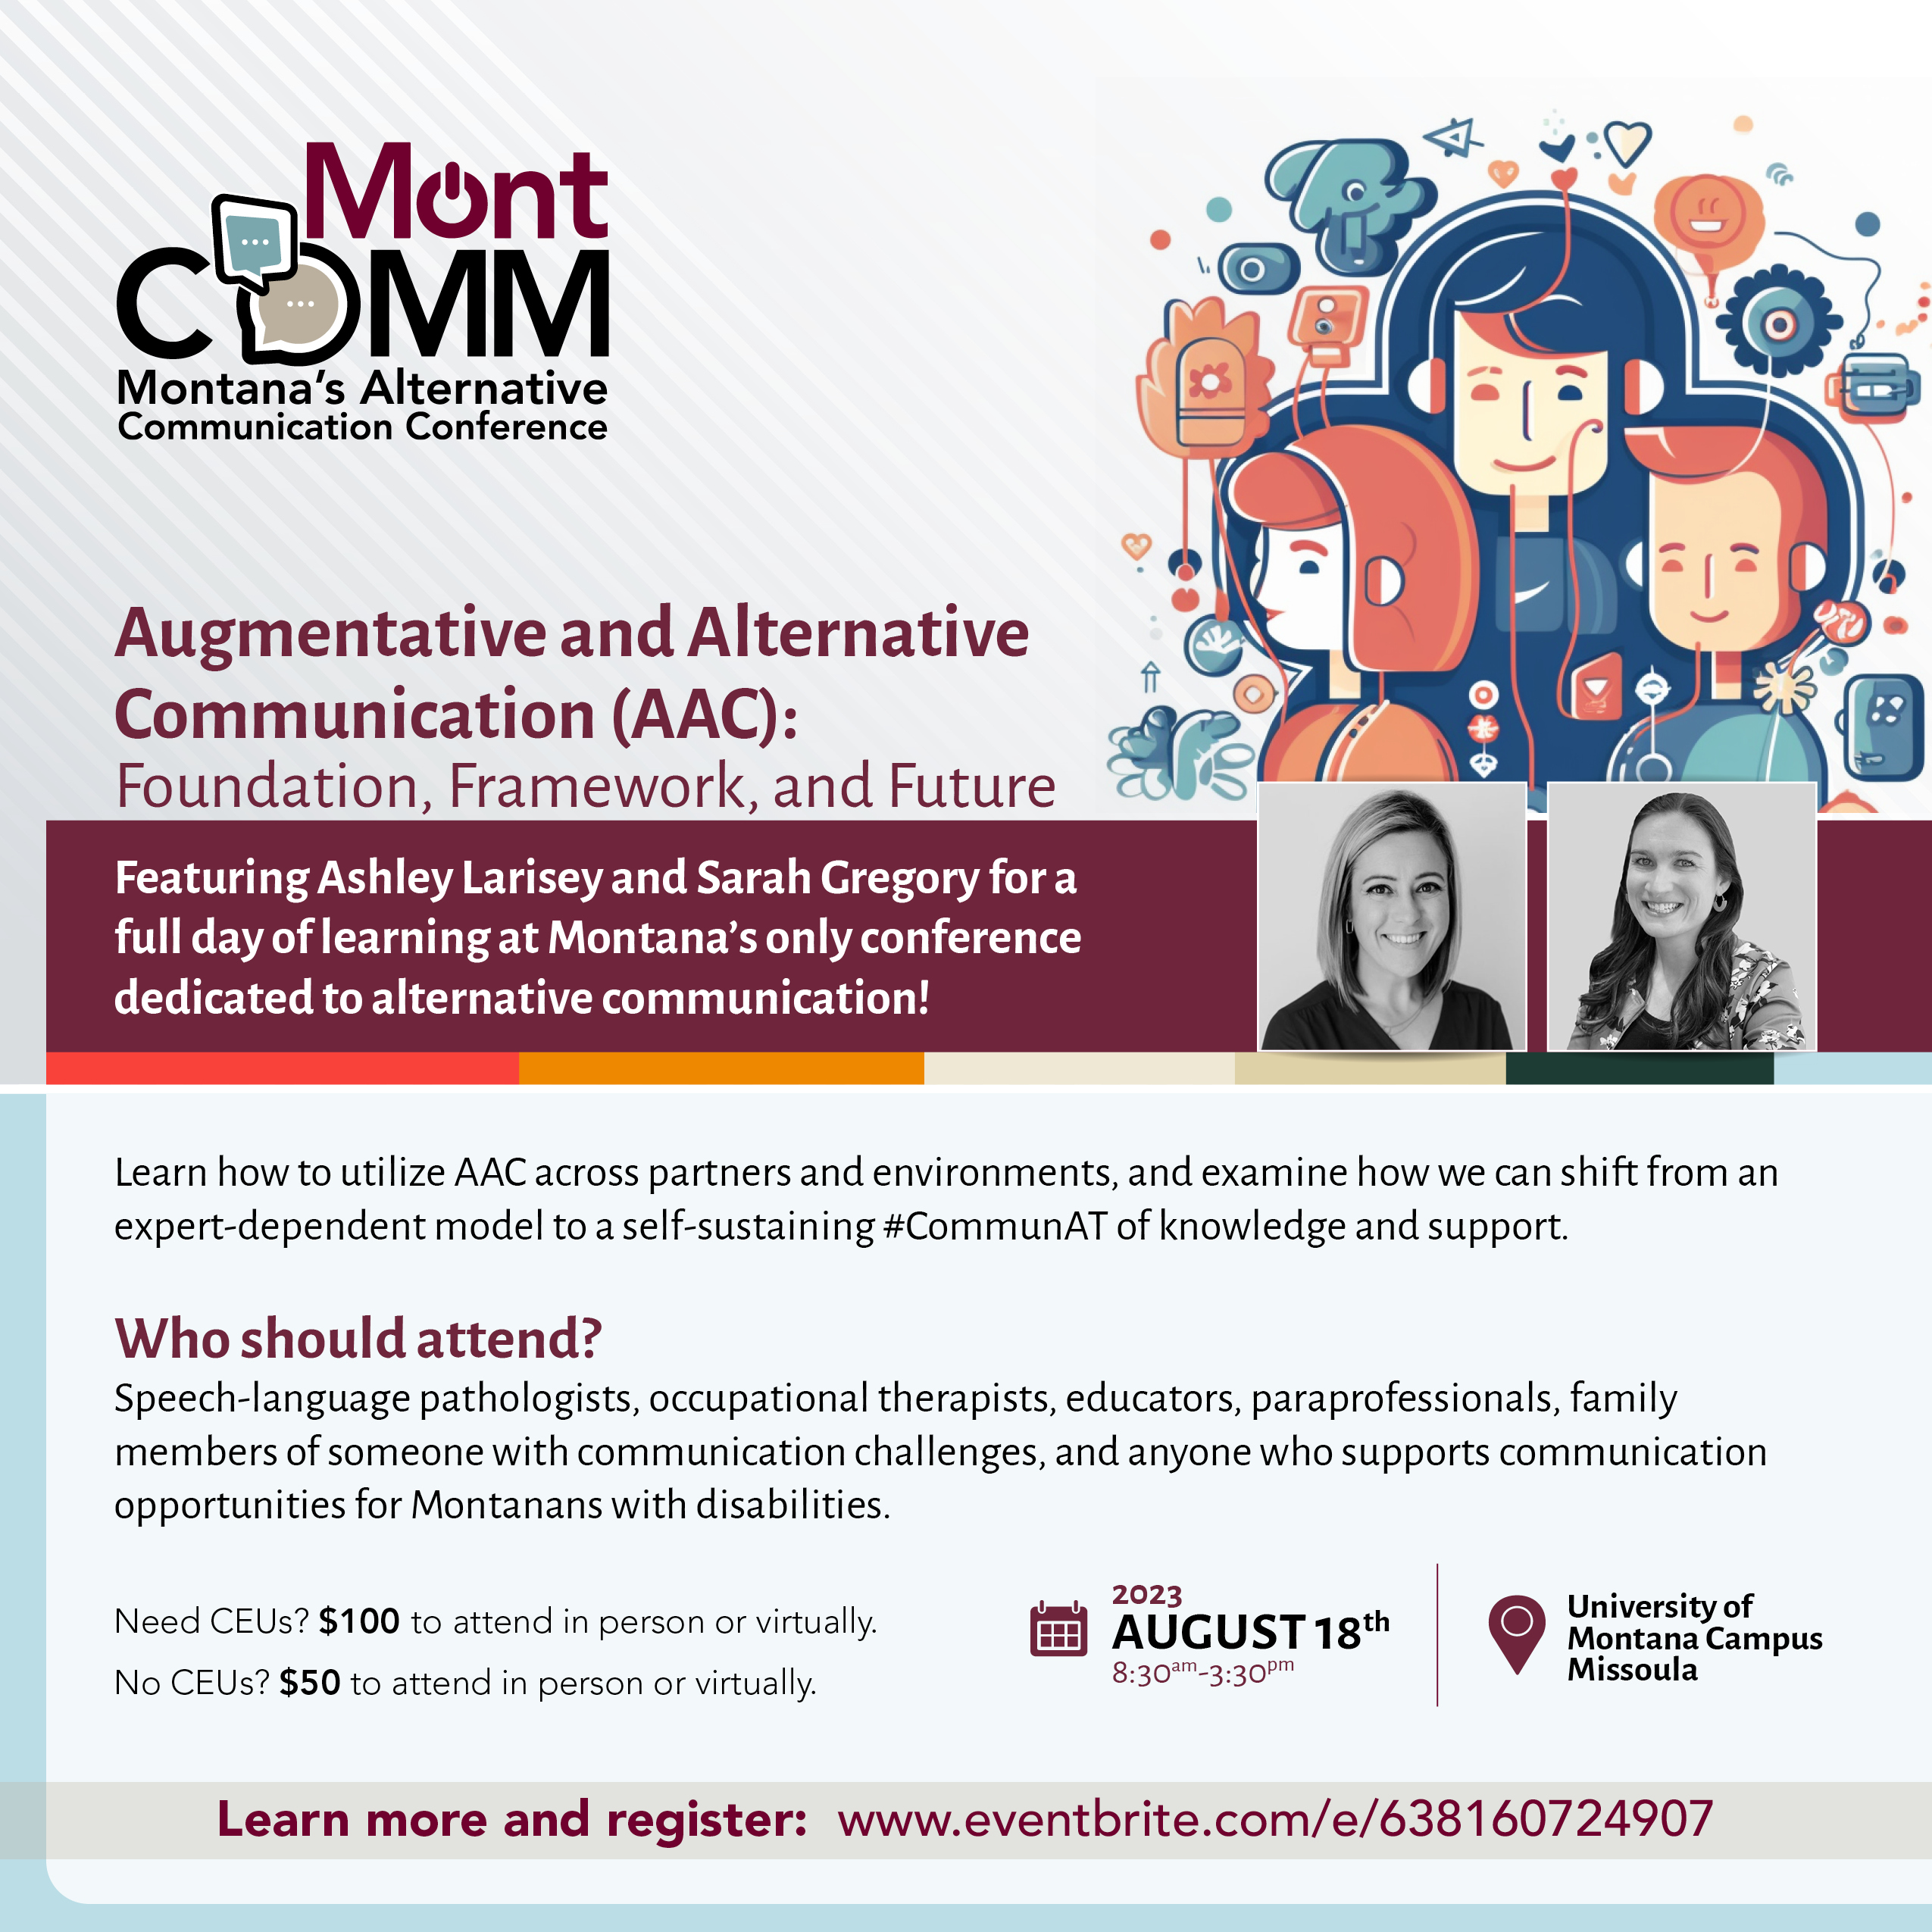 MontCOMM logo. Augmentative and Alternative Communication (AAC): Foundation, Framework, and Future. Featuring AAC experts Ashley Larisey and Sarah Gregory for a full day of learning. August 18th, 8:30 am to 3:30 pm, online or in-person in Missoula on the UM campus. OPI, ASHA, and MOTA credits pending. SLPs, OTs, educators, direct support staff, and families are all welcome. SEssions for those fairly new to alternative communciation and those who are more fluent as well. $100 if you need CEUS, $50 if you don't. Write shawna.hanson@mso.umt.edu with questions.